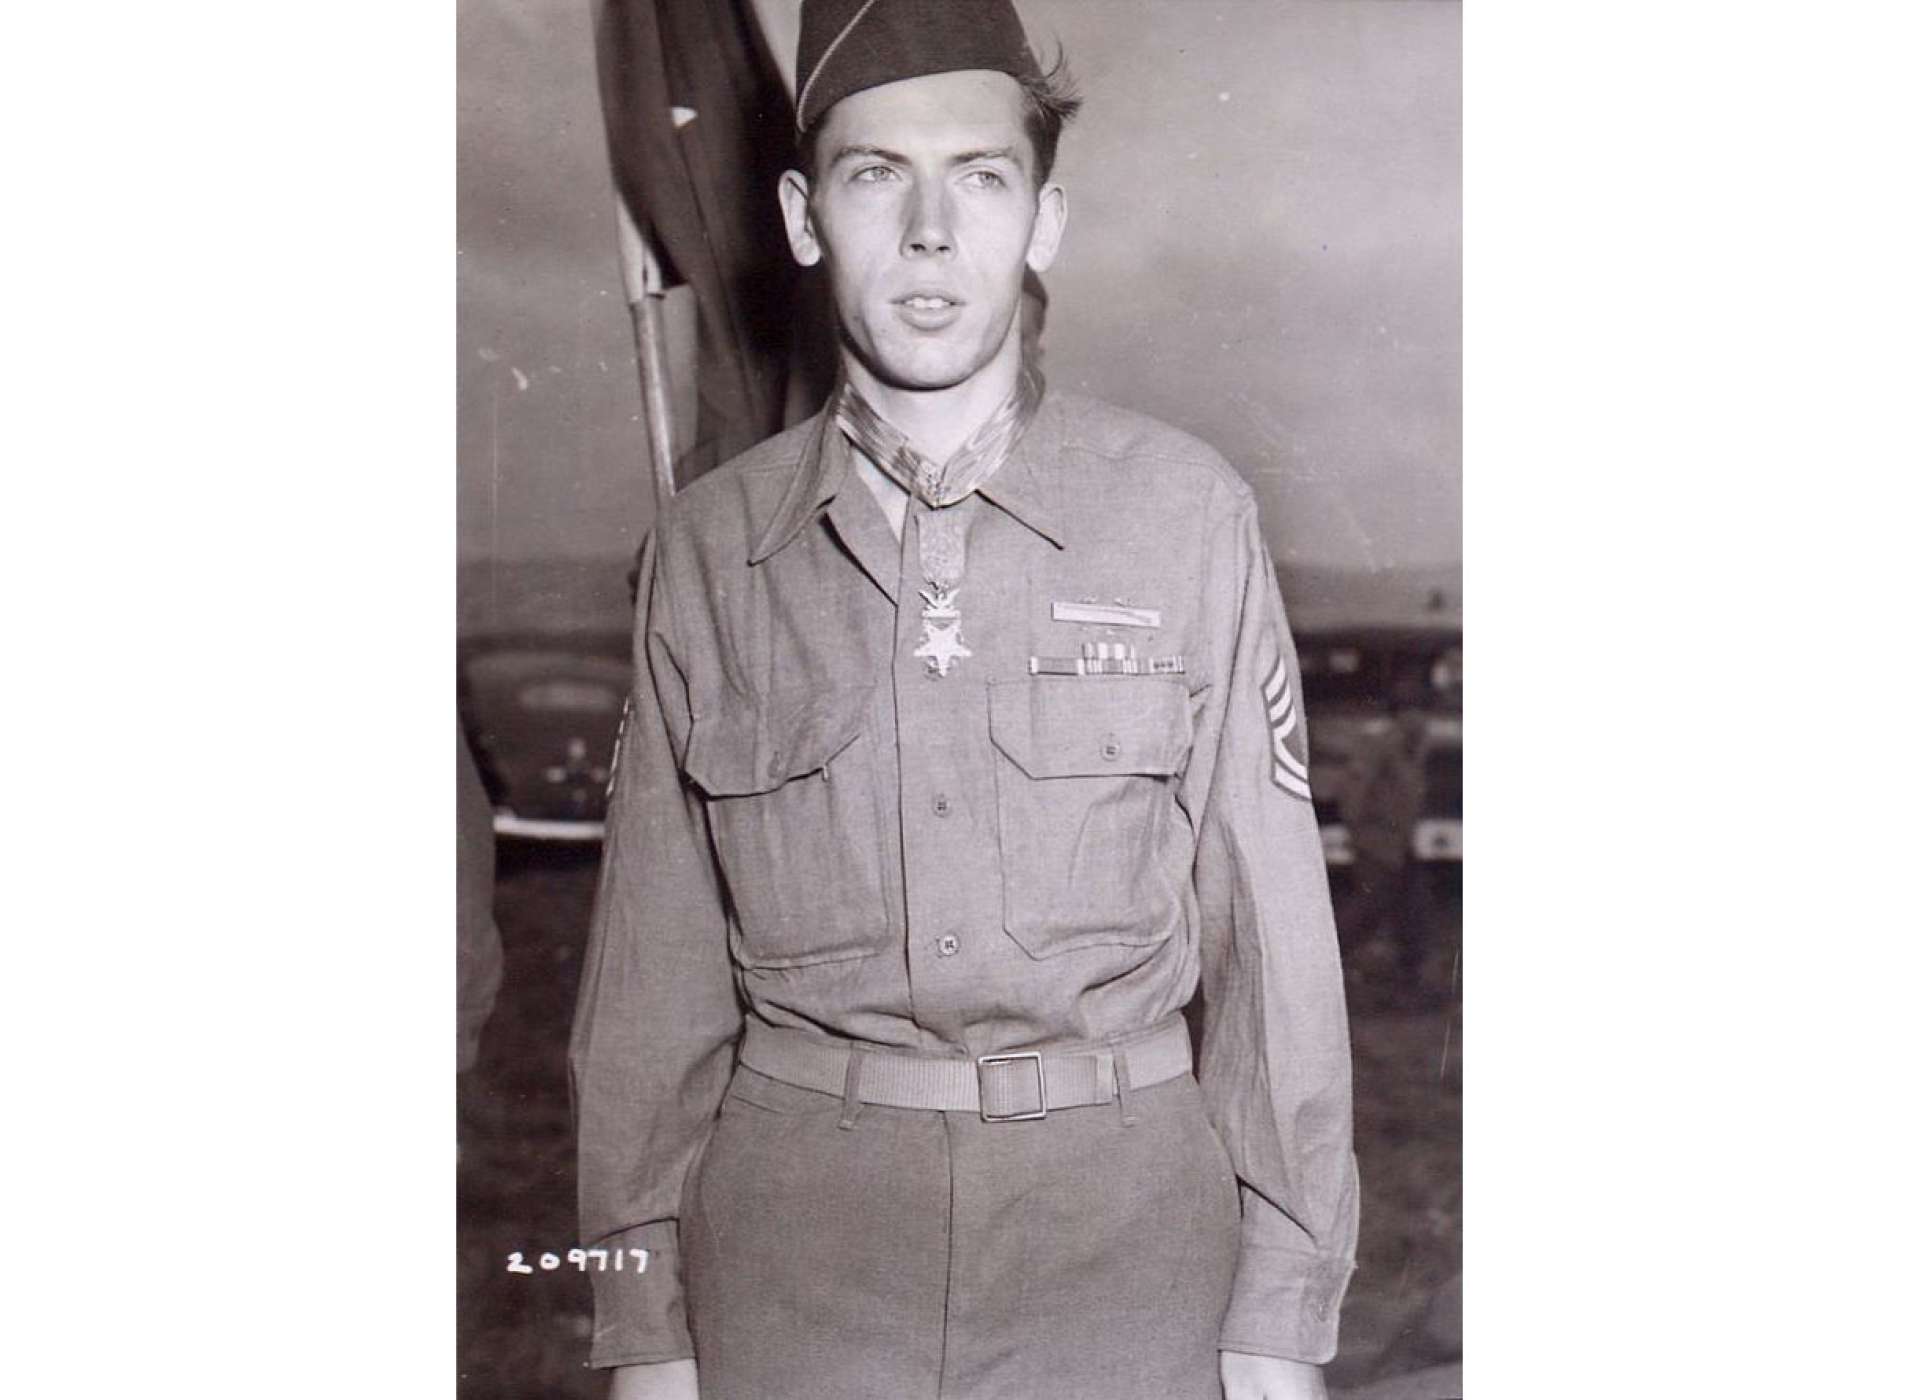 Sergeant Francis S. Currey, 3rd Battalion, 120th Infantry Regiment, 30th Infantry Division, Medal of Honor recipient.